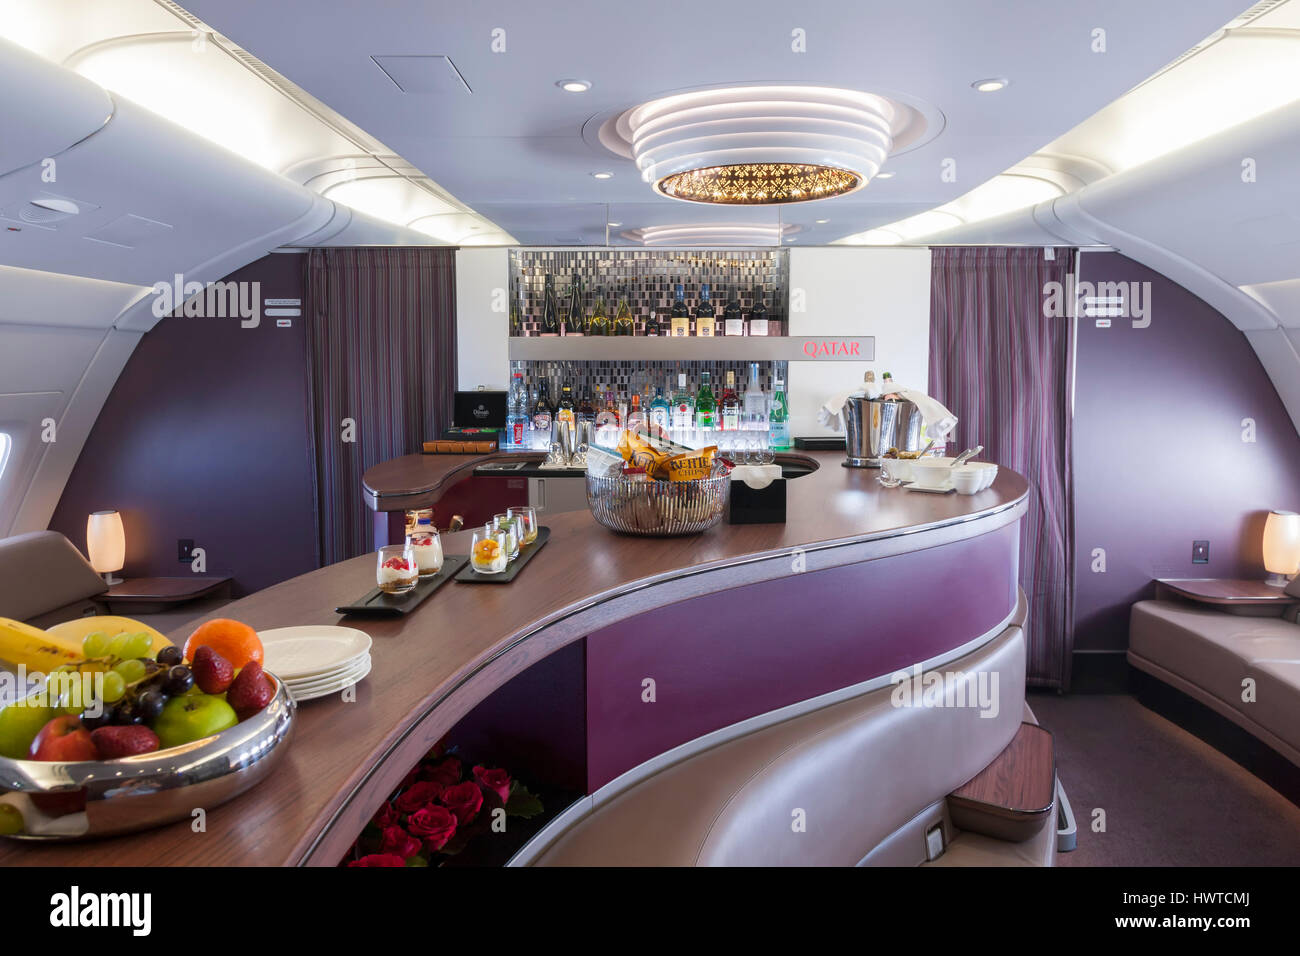 Qatar Airways Business Class Lounge Onboard Airbus A380 800